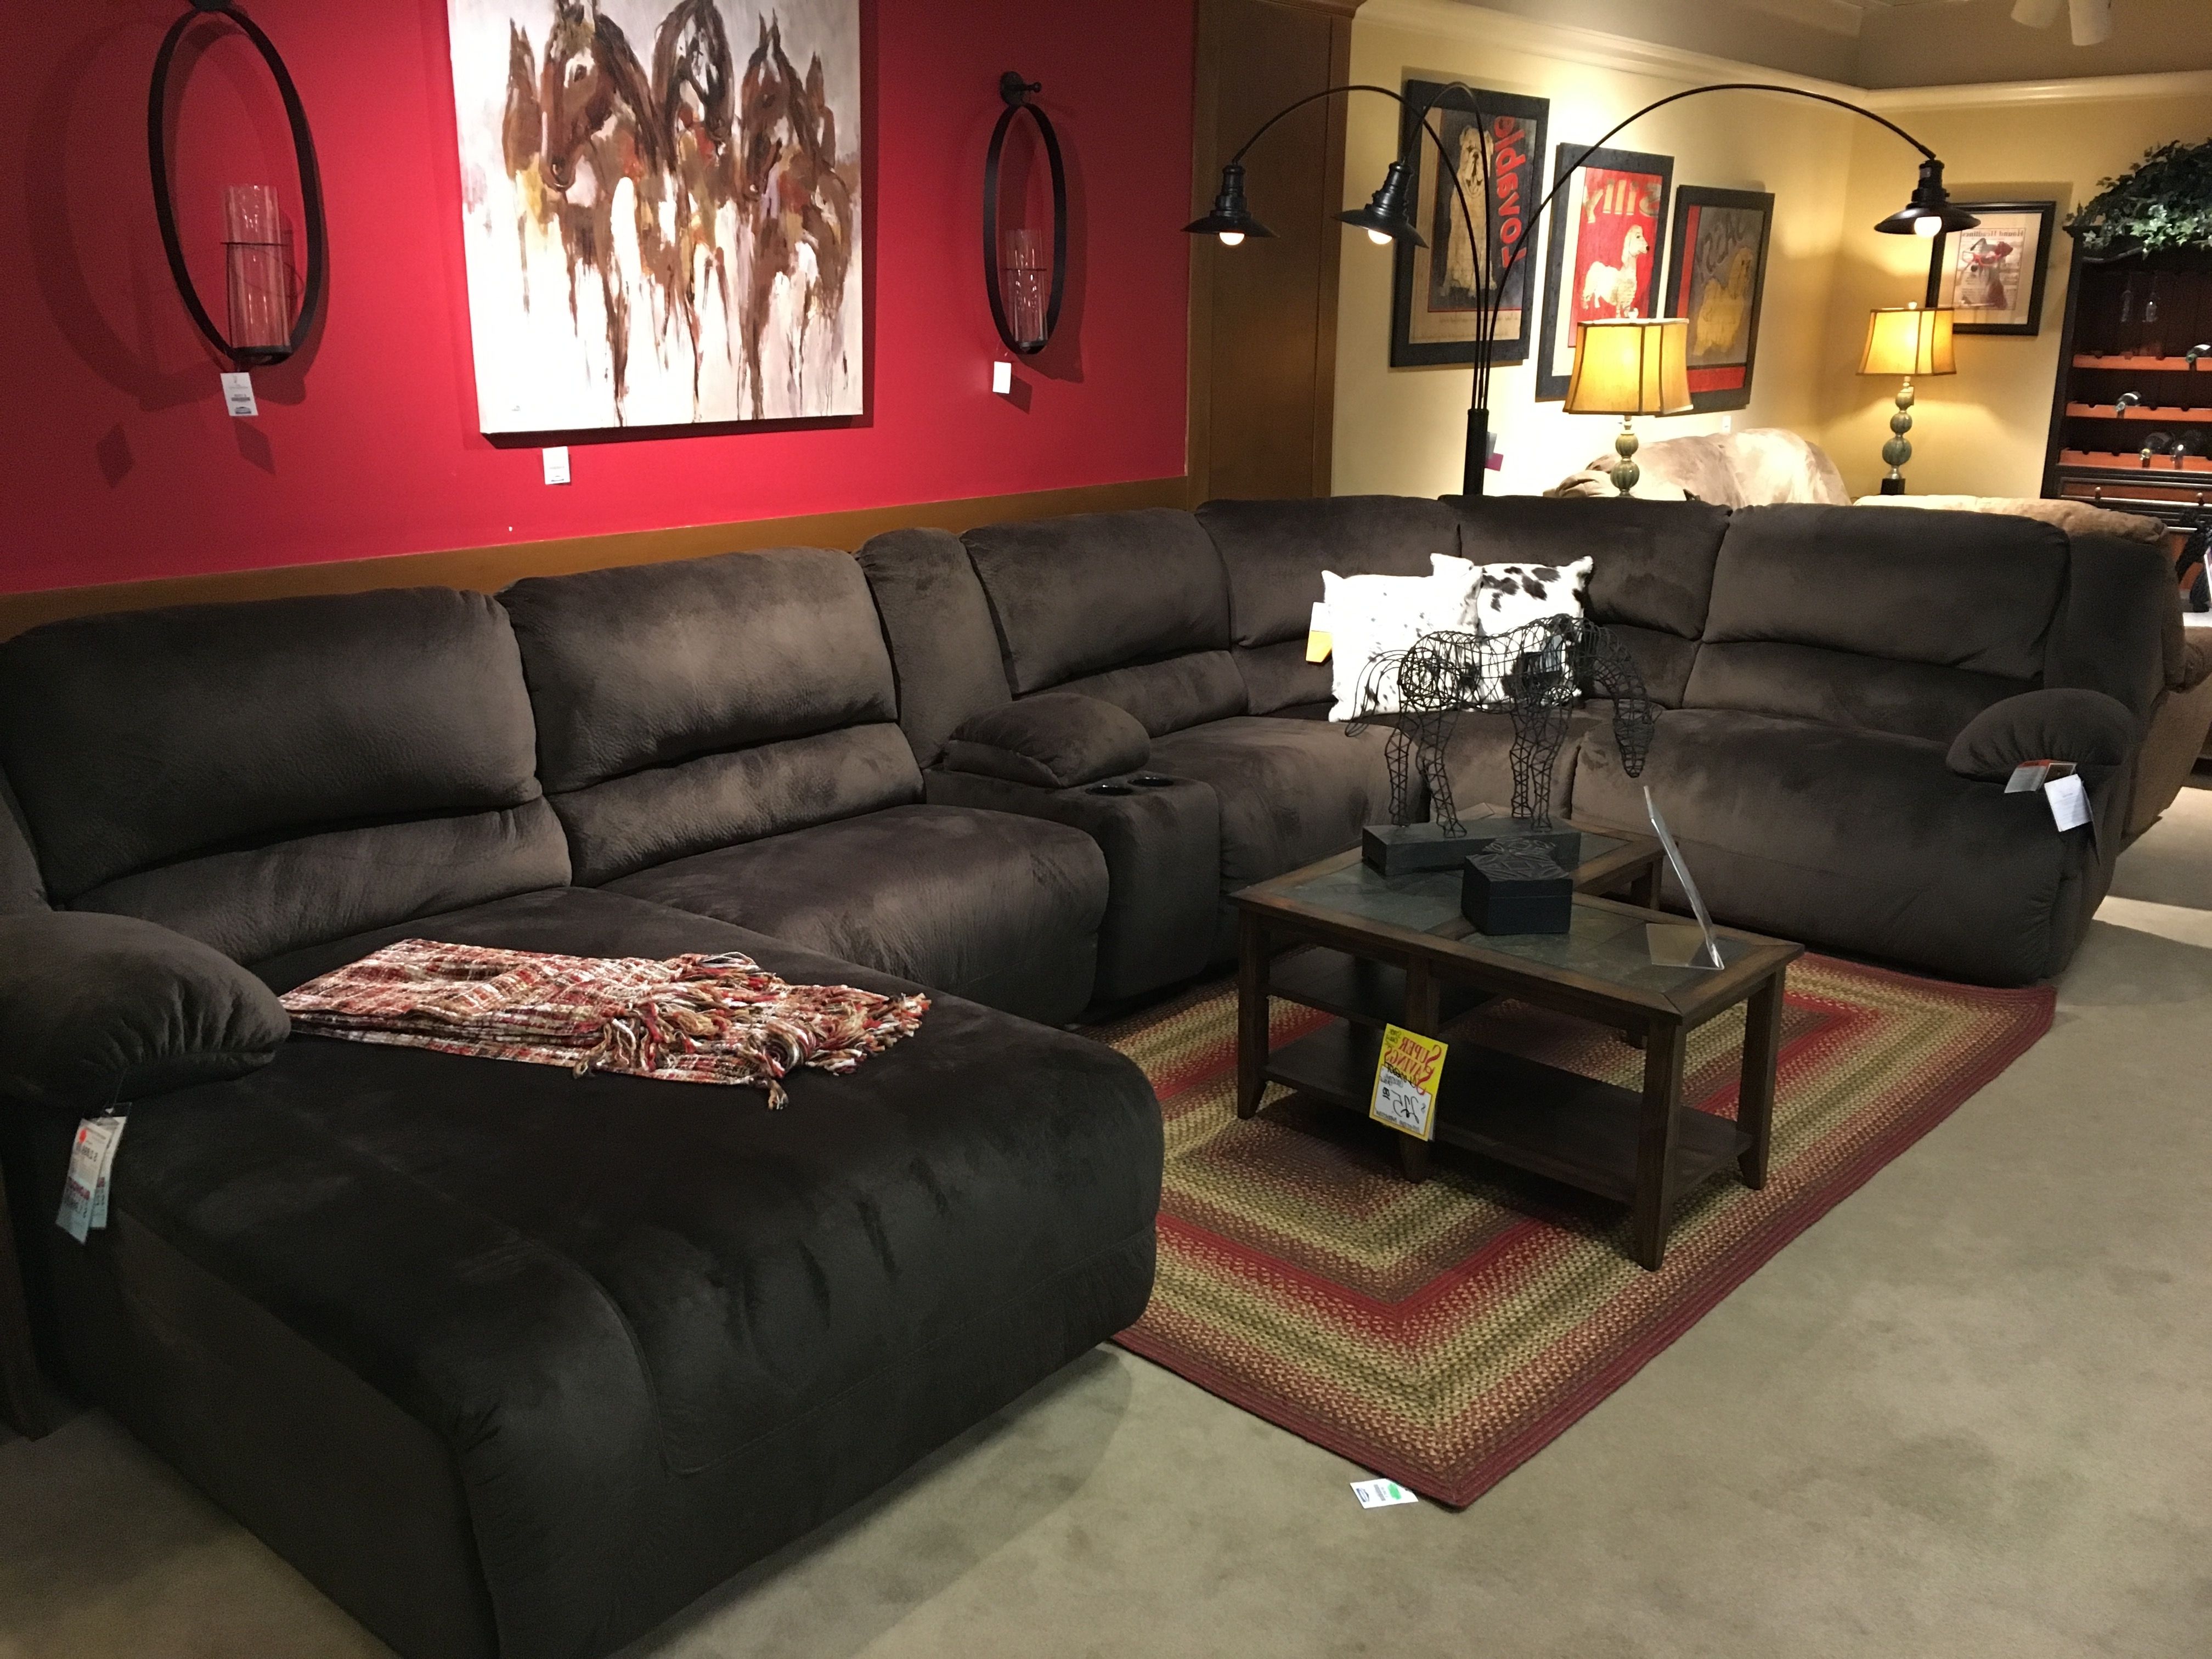 Newest Sectional Sofas At Bad Boy Regarding Bad Boy Furniture Sectional Sofas • Sectional Sofa (View 1 of 20)